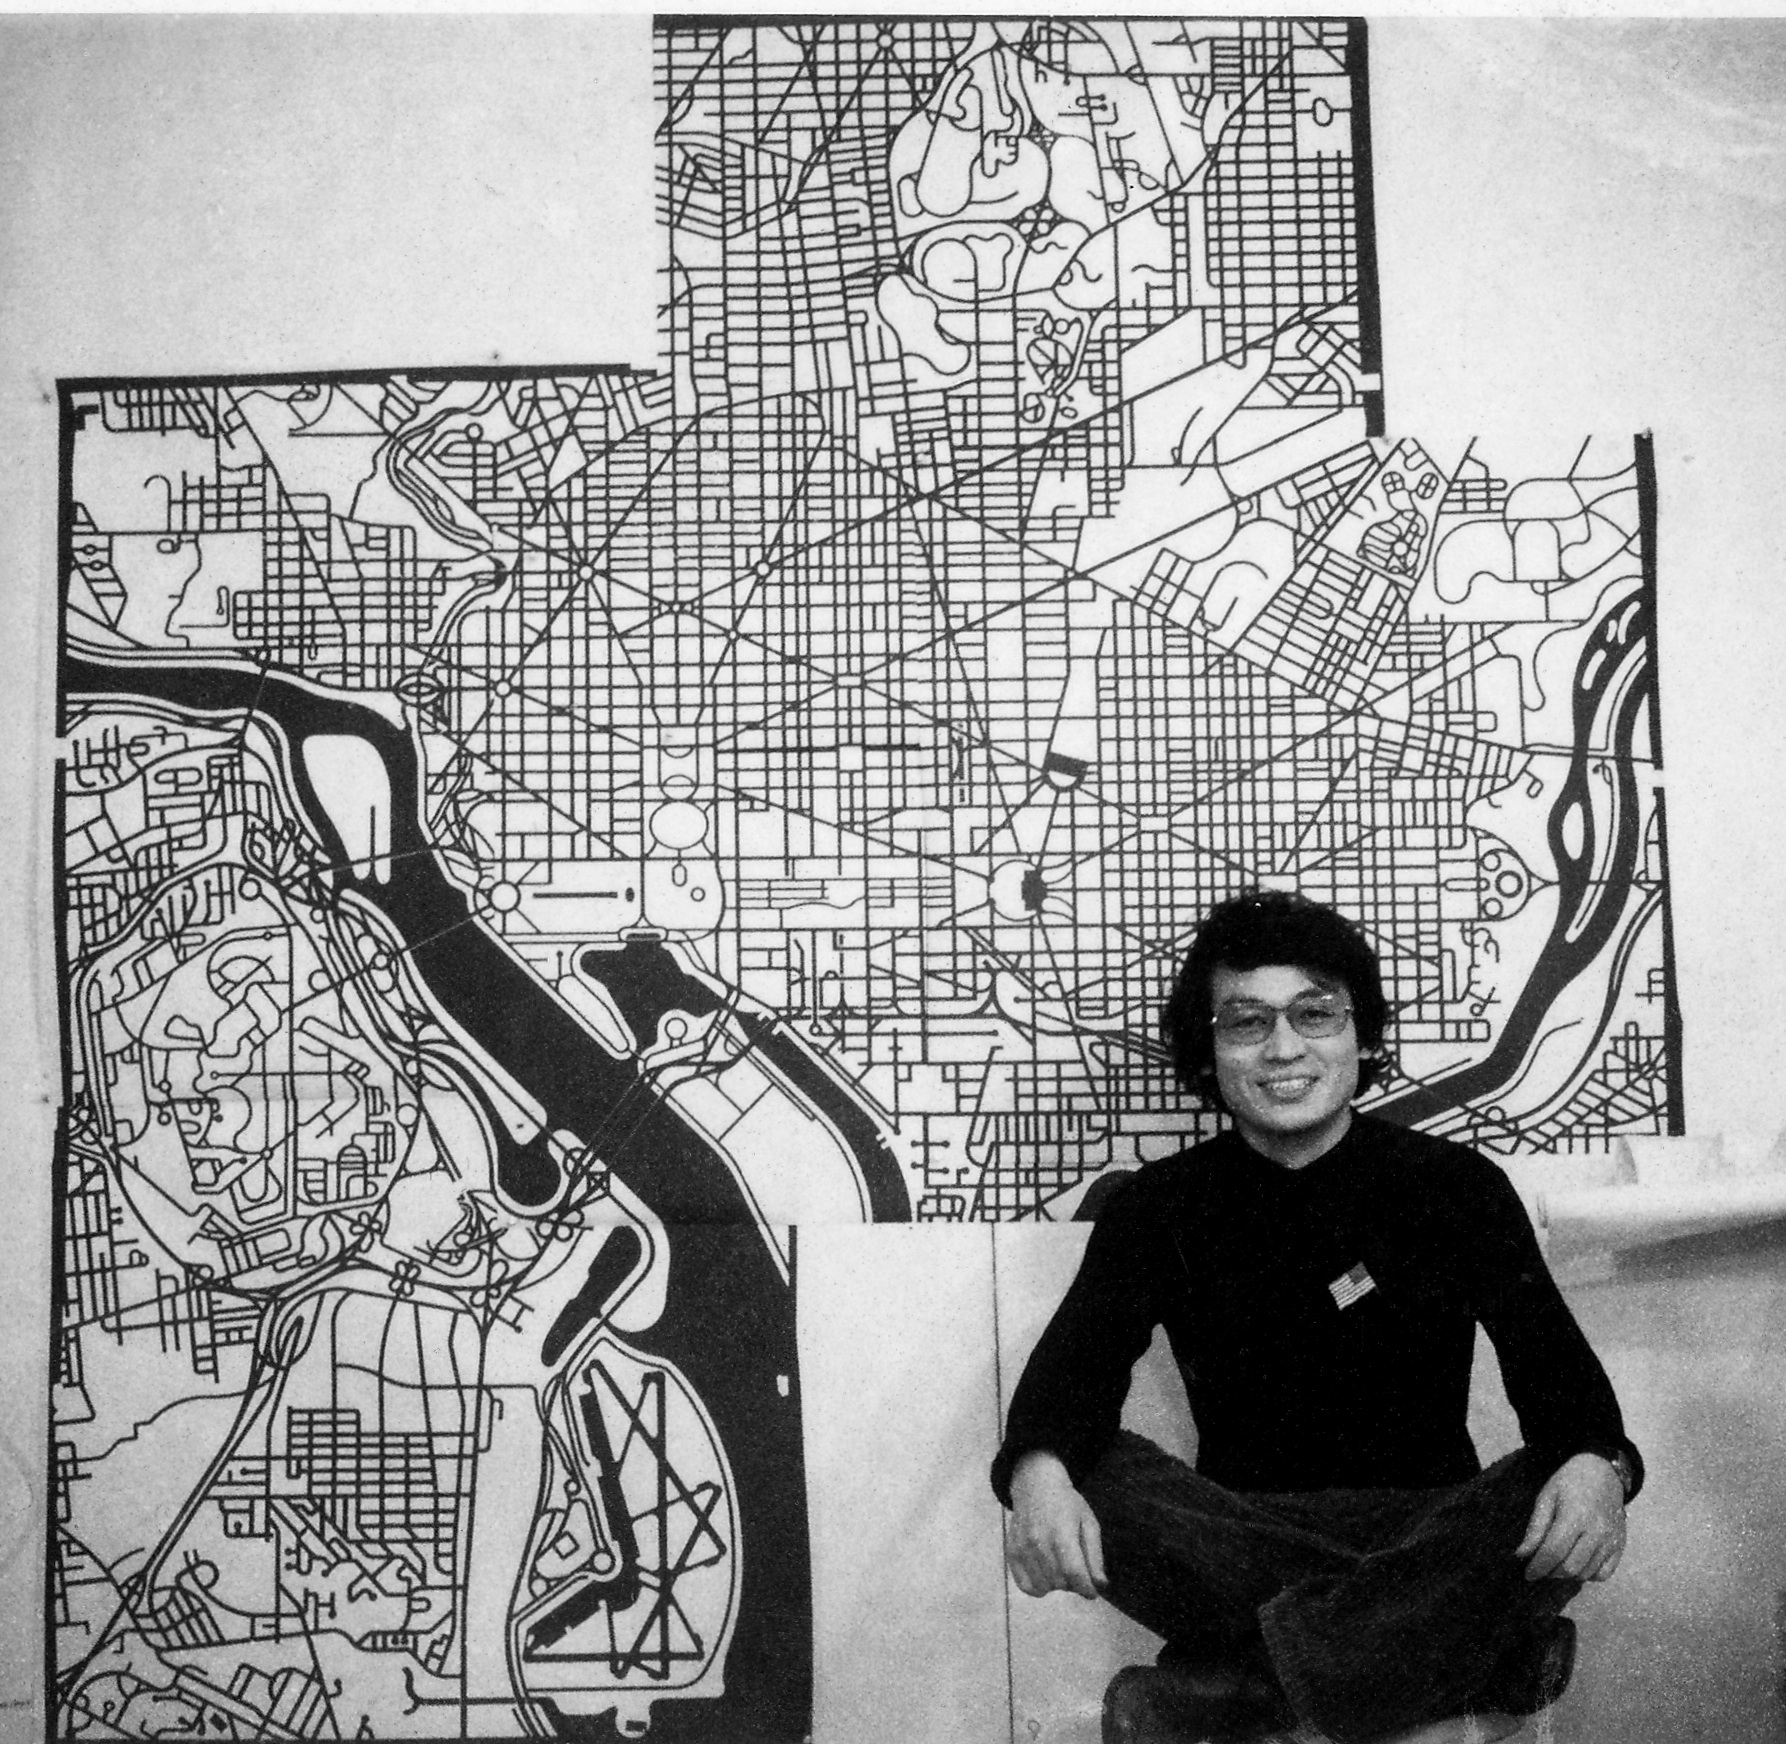 Aki sitting in front of map cutouts